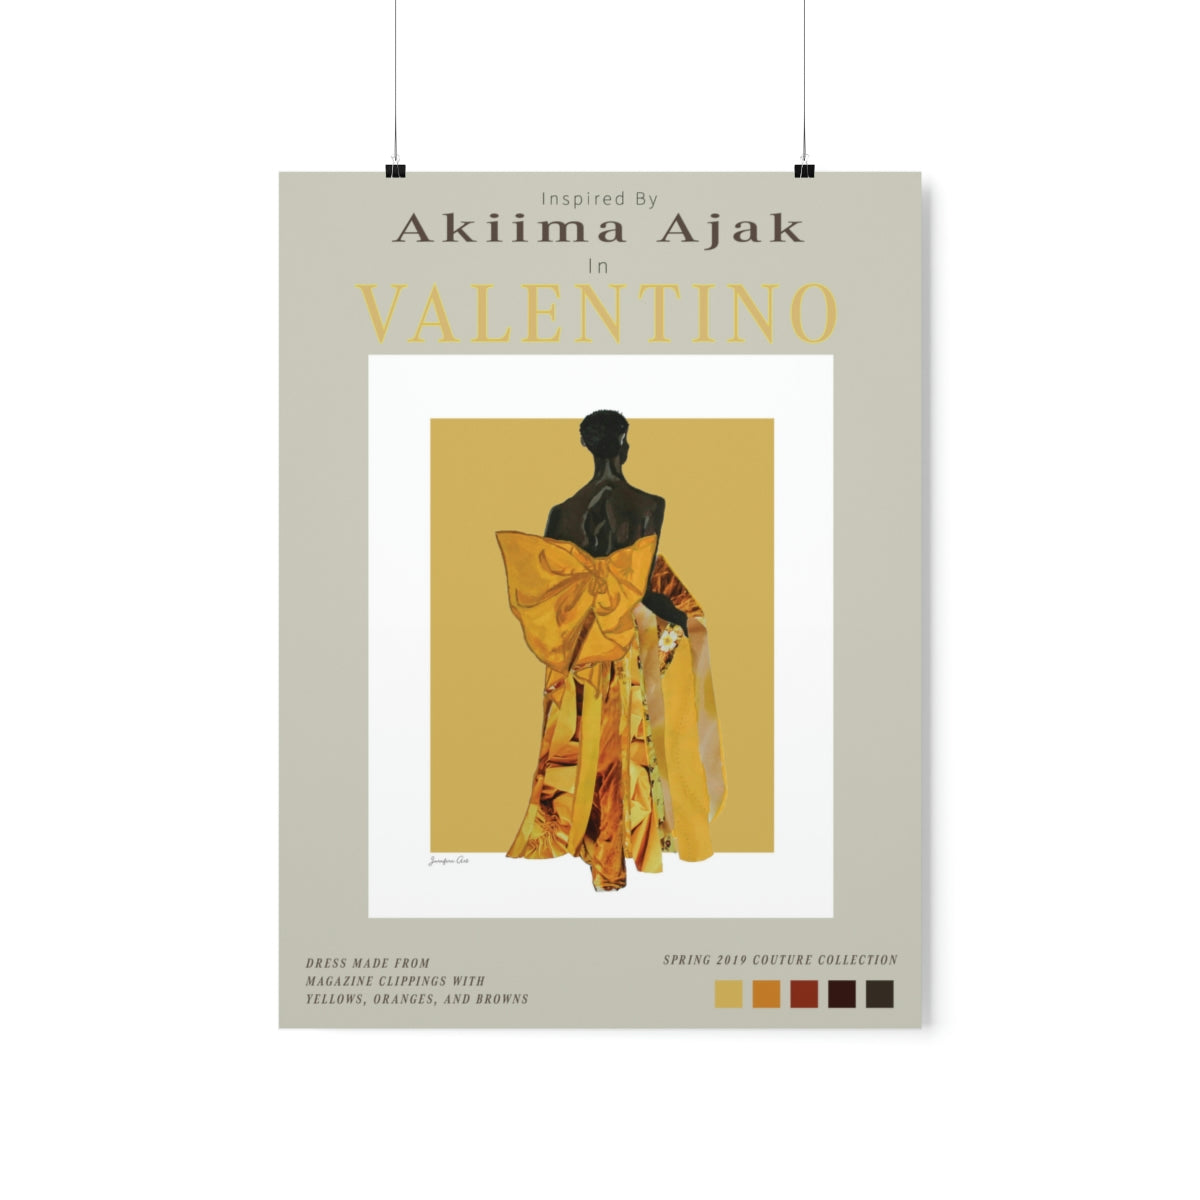 Archival Posters: The Akiima Ajak Valentino Collage Dress Matte Fashion Poster